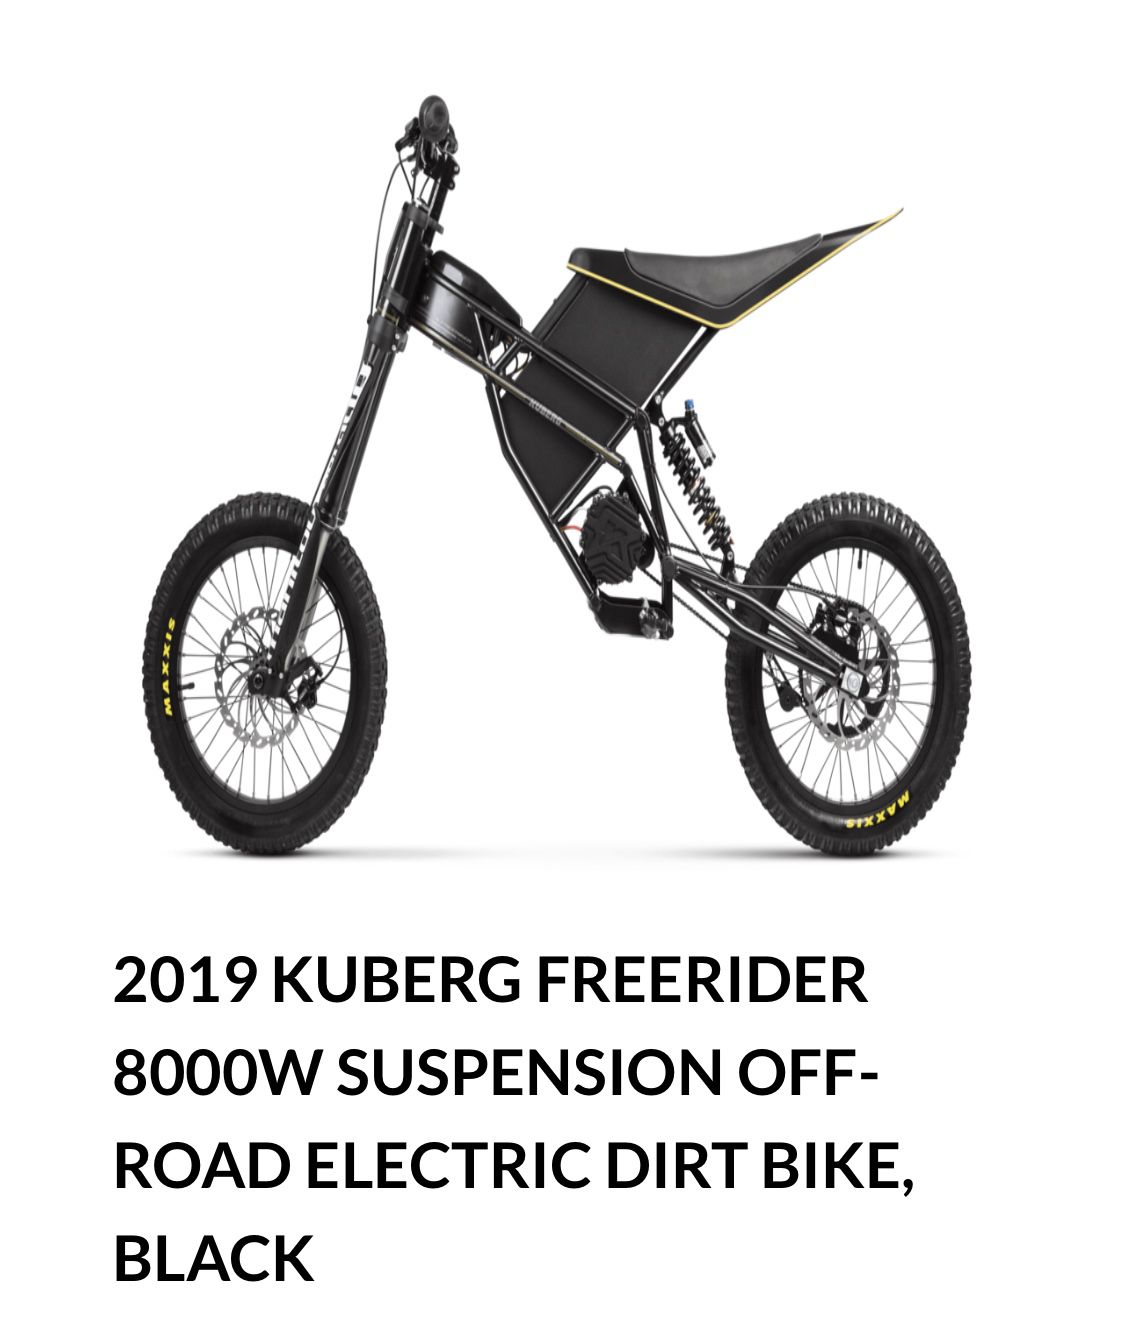 Kuberg electric dirt bike $2495 or trade for small pedal assist mountain bike form wife this one has too much power for her